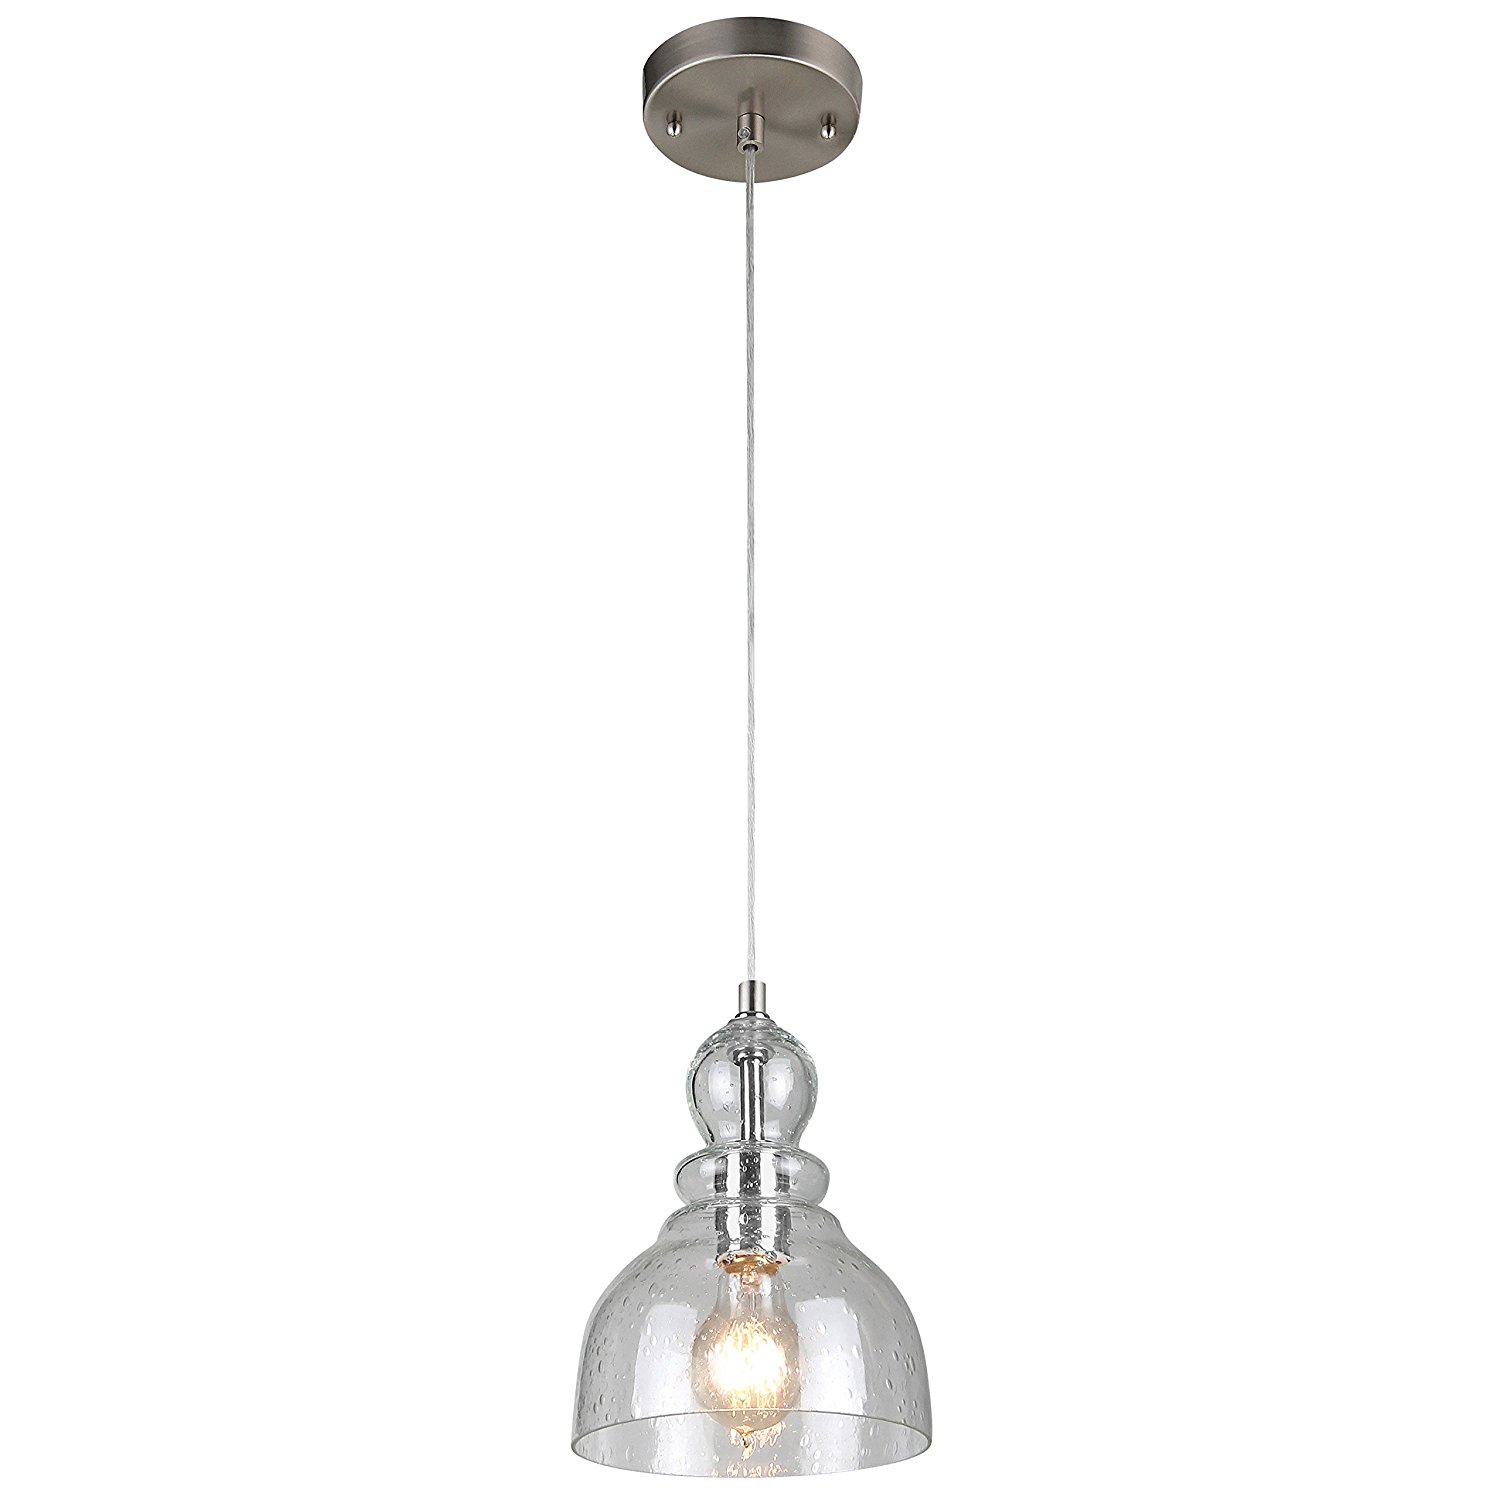 Westinghouse 6100700 Industrial One-Light Adjustable Mini Pendant with Handblown Clear Seeded Glass, Brushed Nickel Finish